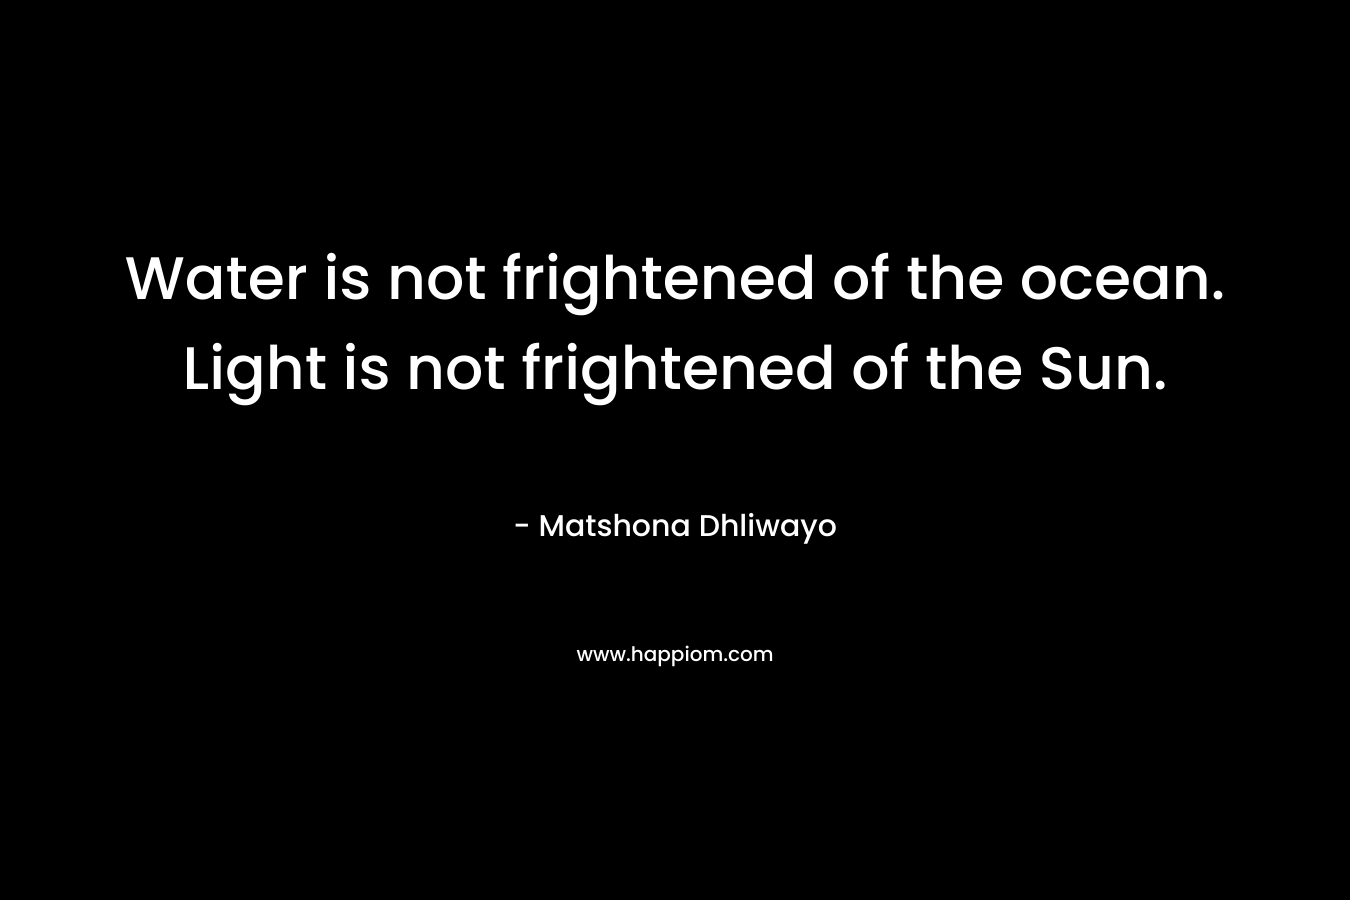 Water is not frightened of the ocean. Light is not frightened of the Sun.